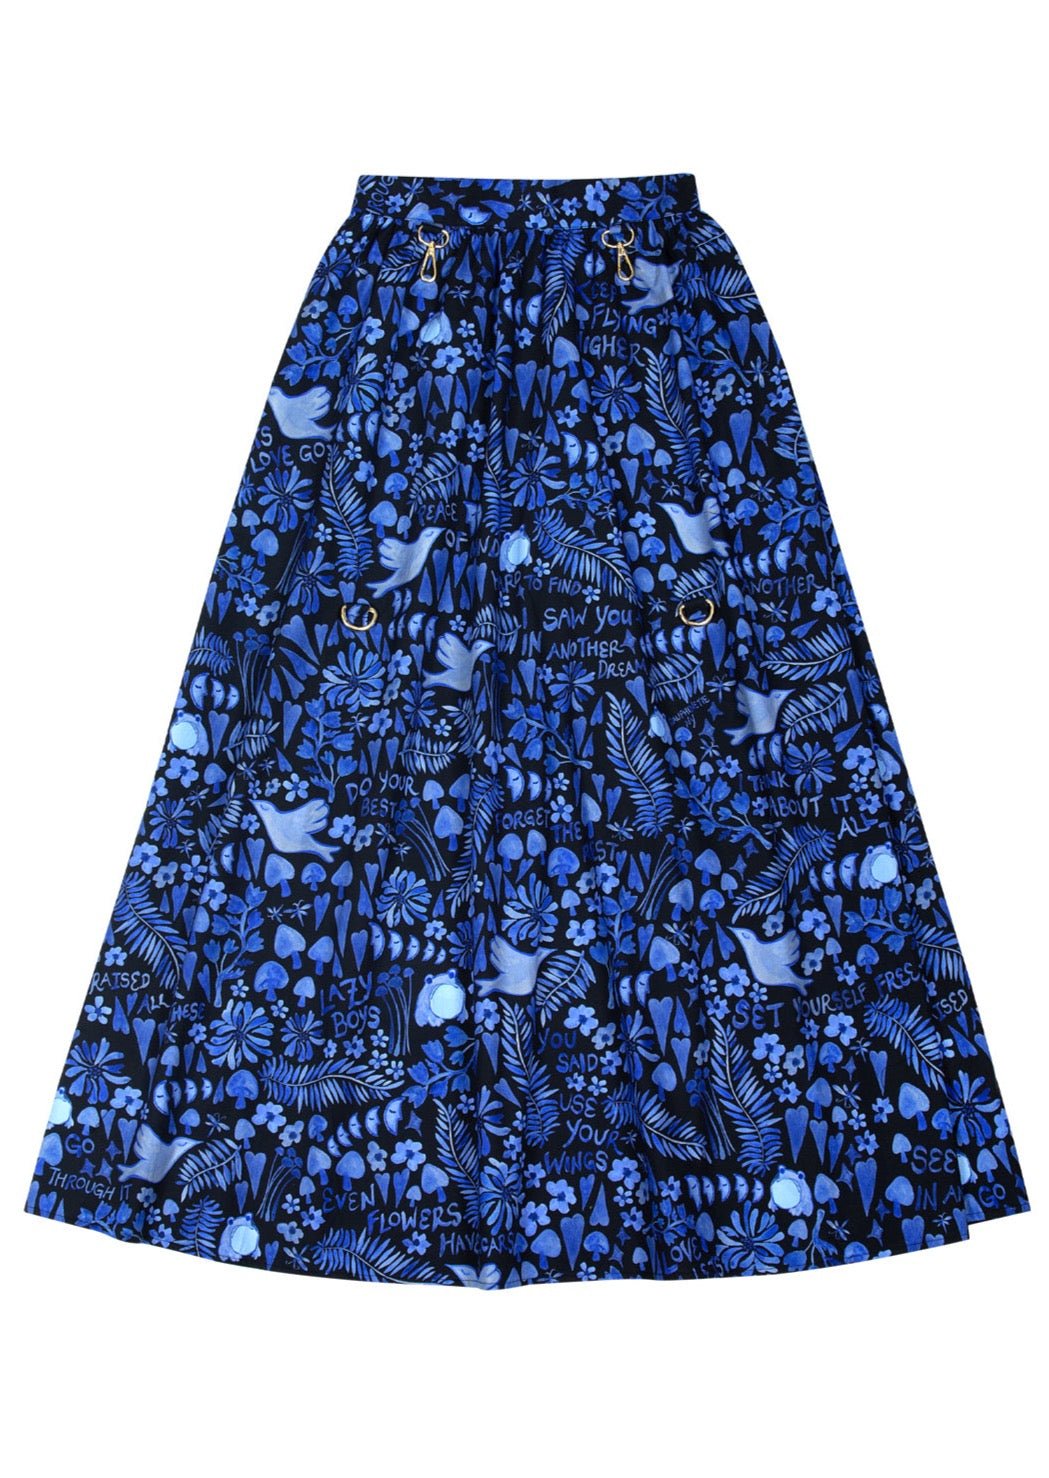 Our Cashin-inspired, convertible Hitched skirt in Lazy Boy Floral cotton.